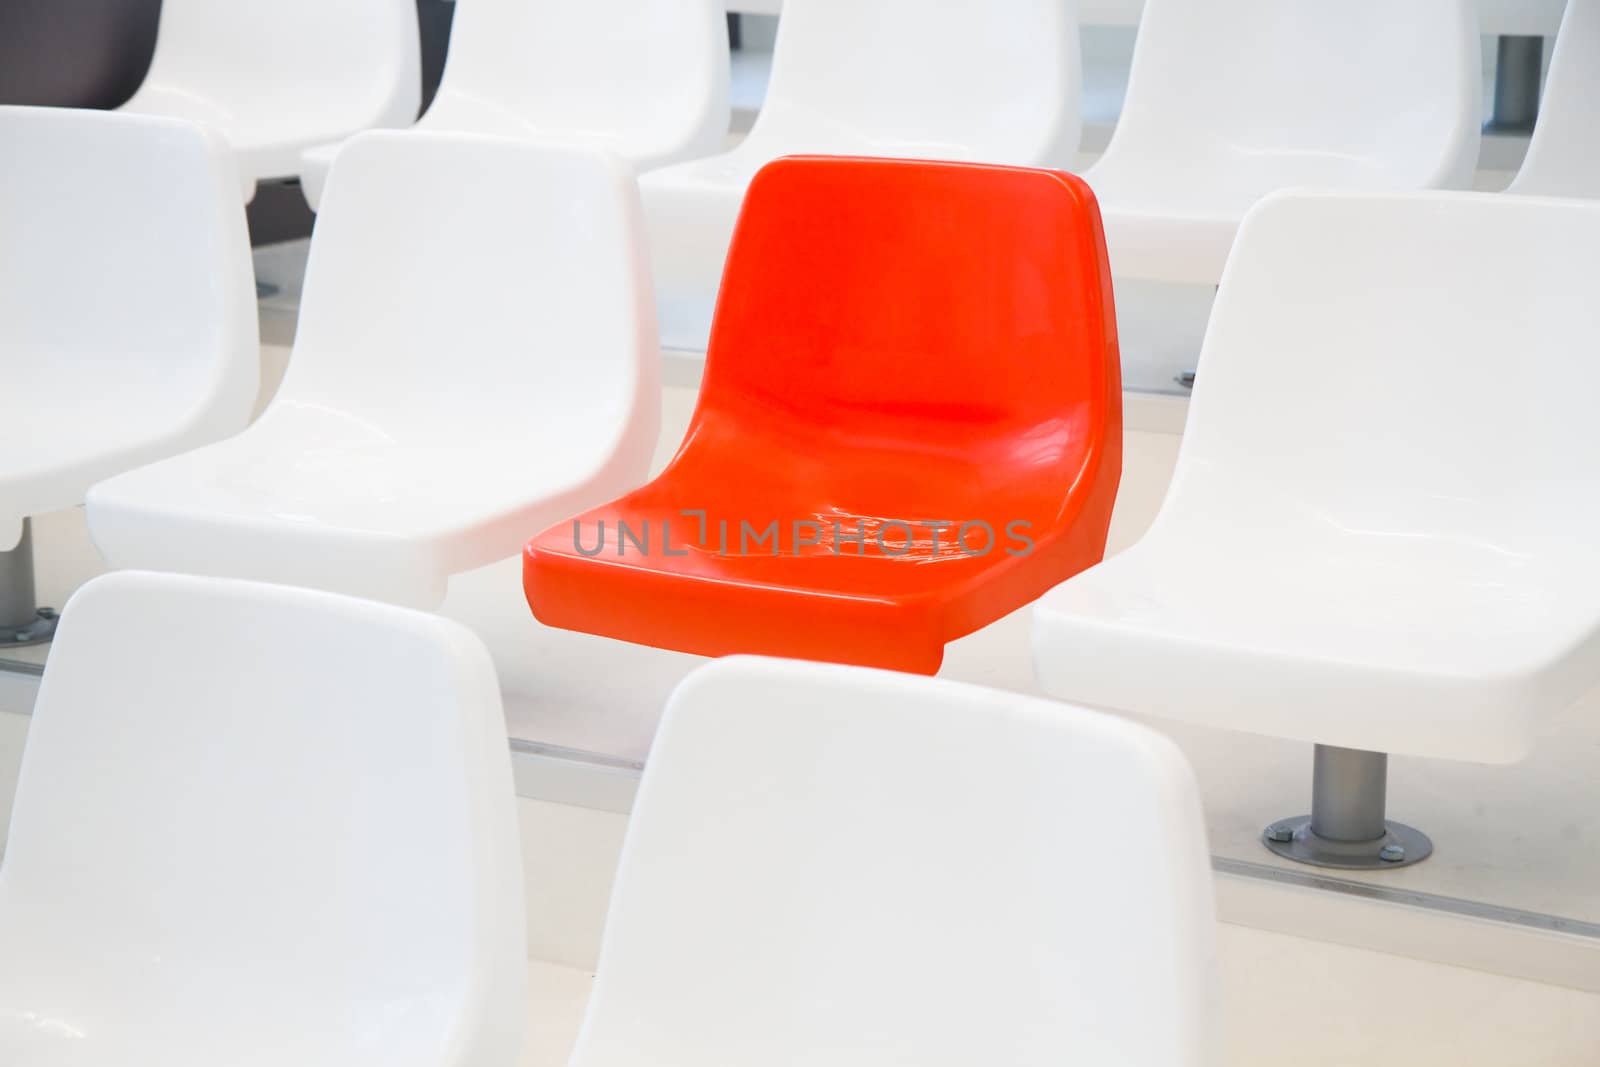 All the chairs are white, one is red - conceptual - horizontal image